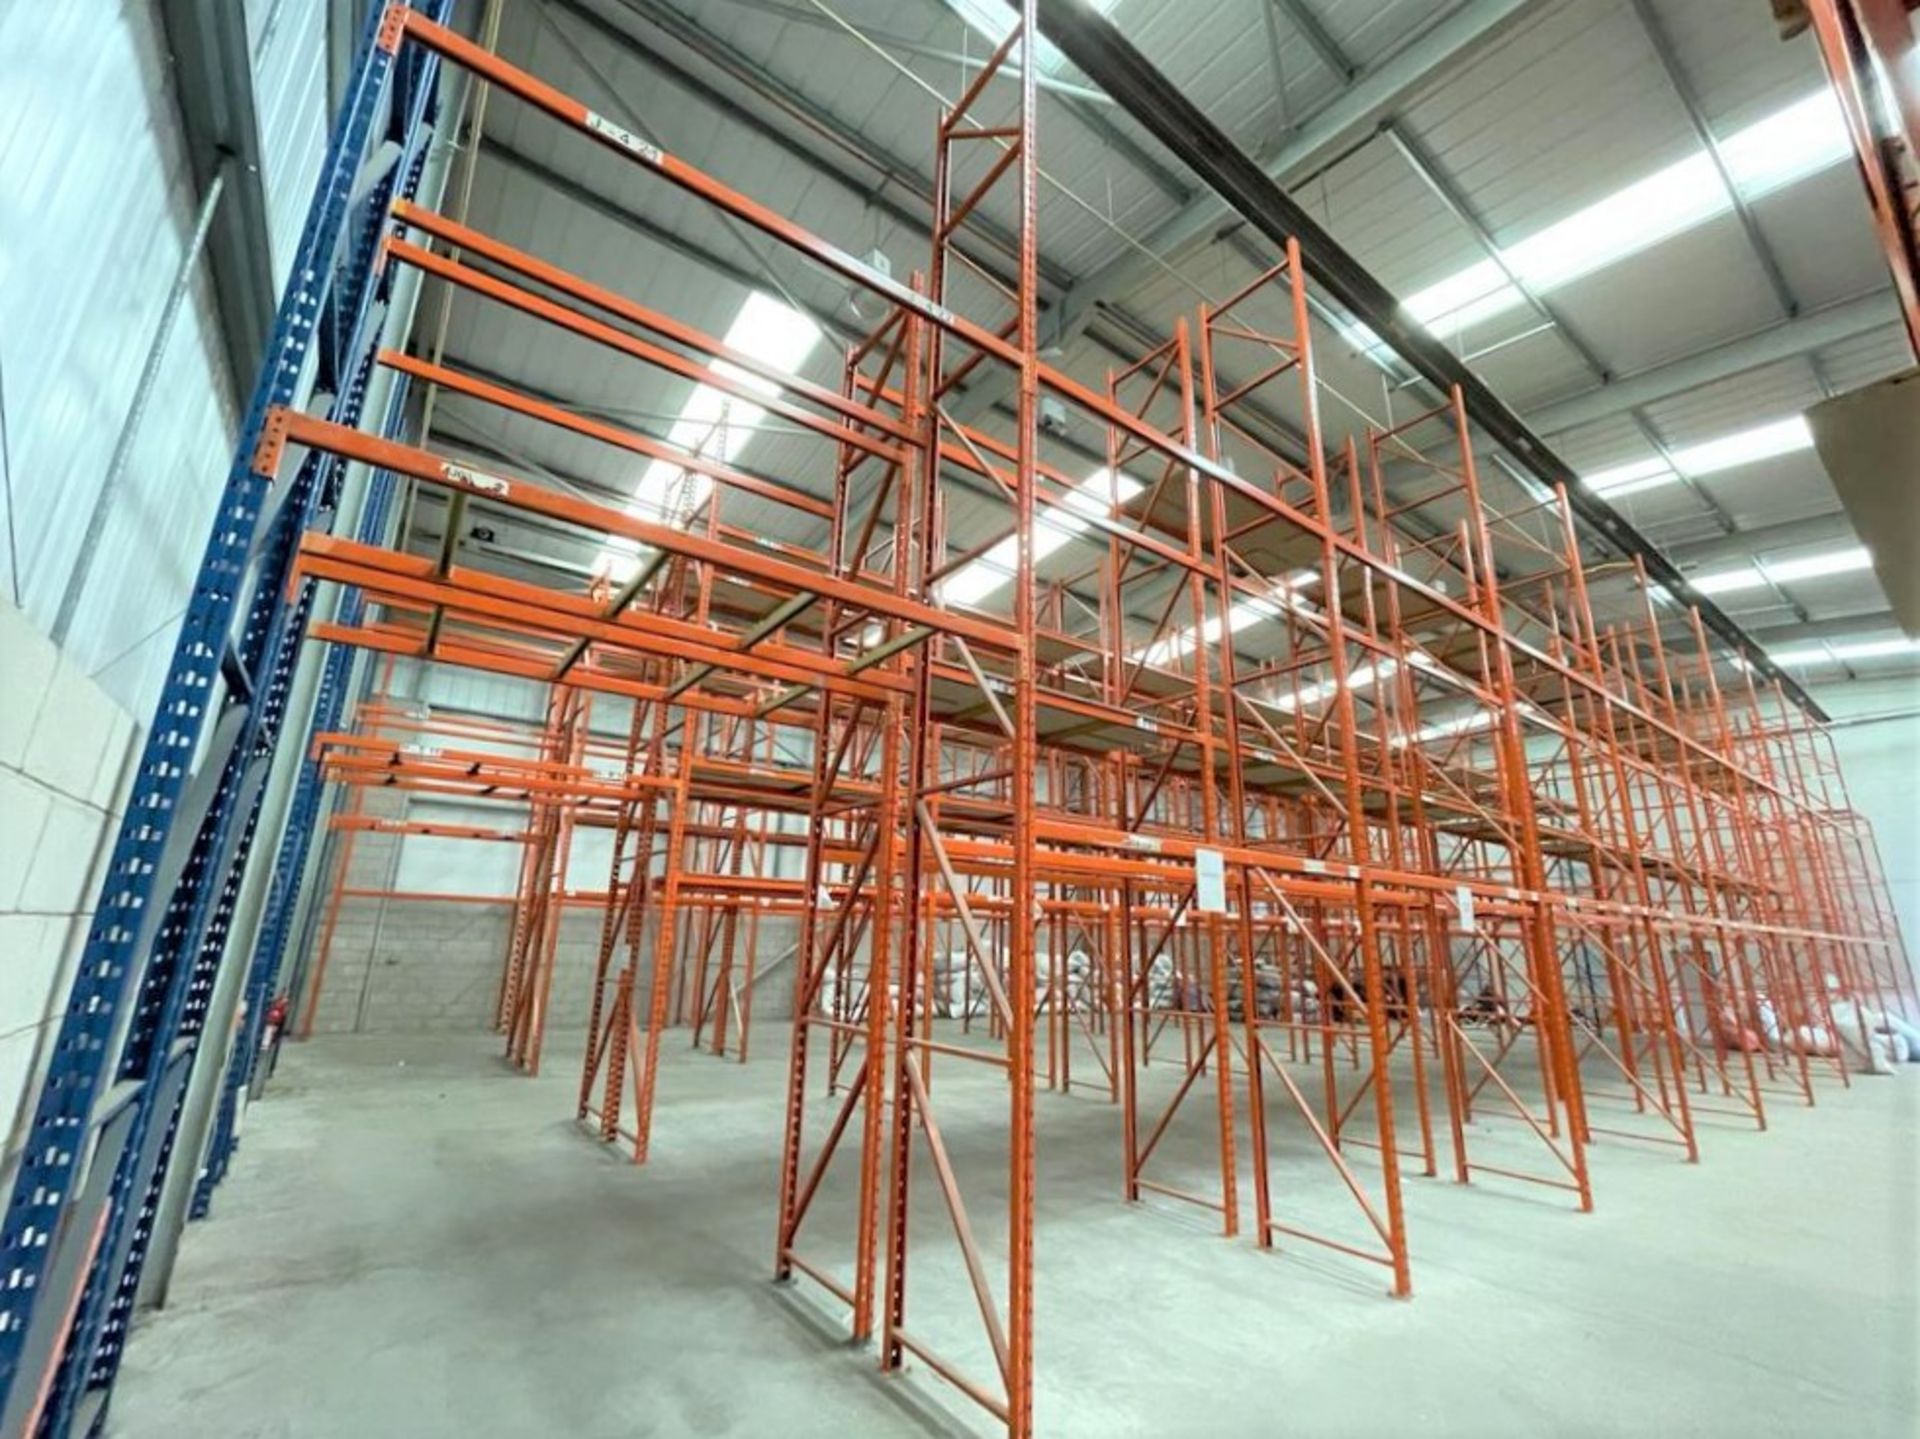 11 x Bays of RediRack Warehouse PALLET RACKING - Lot Includes 12 x Uprights and 46 x Crossbeams -